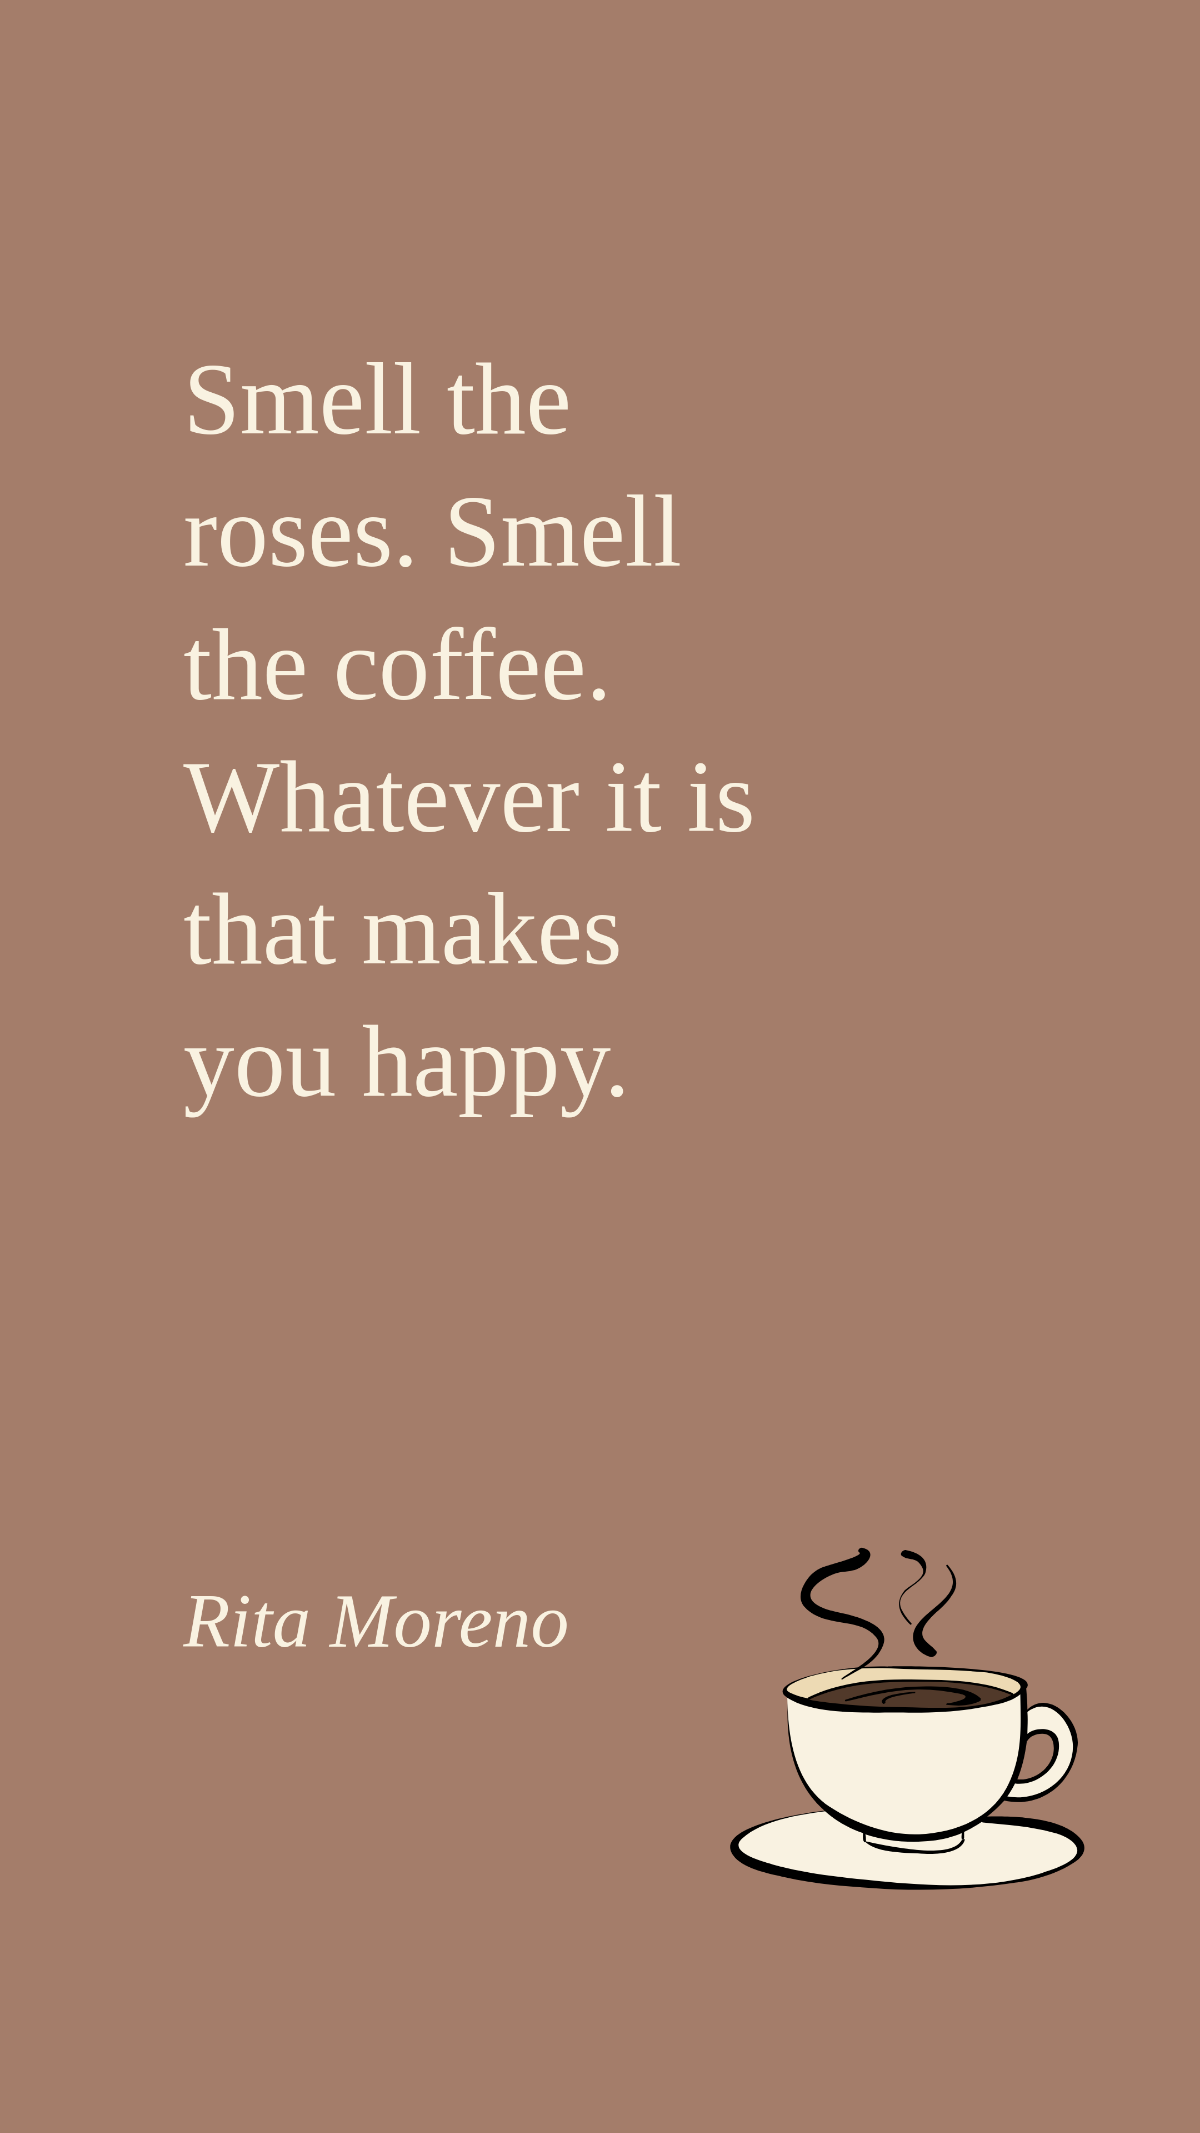 Rita Moreno - Smell the roses. Smell the coffee. Whatever it is that makes you happy.